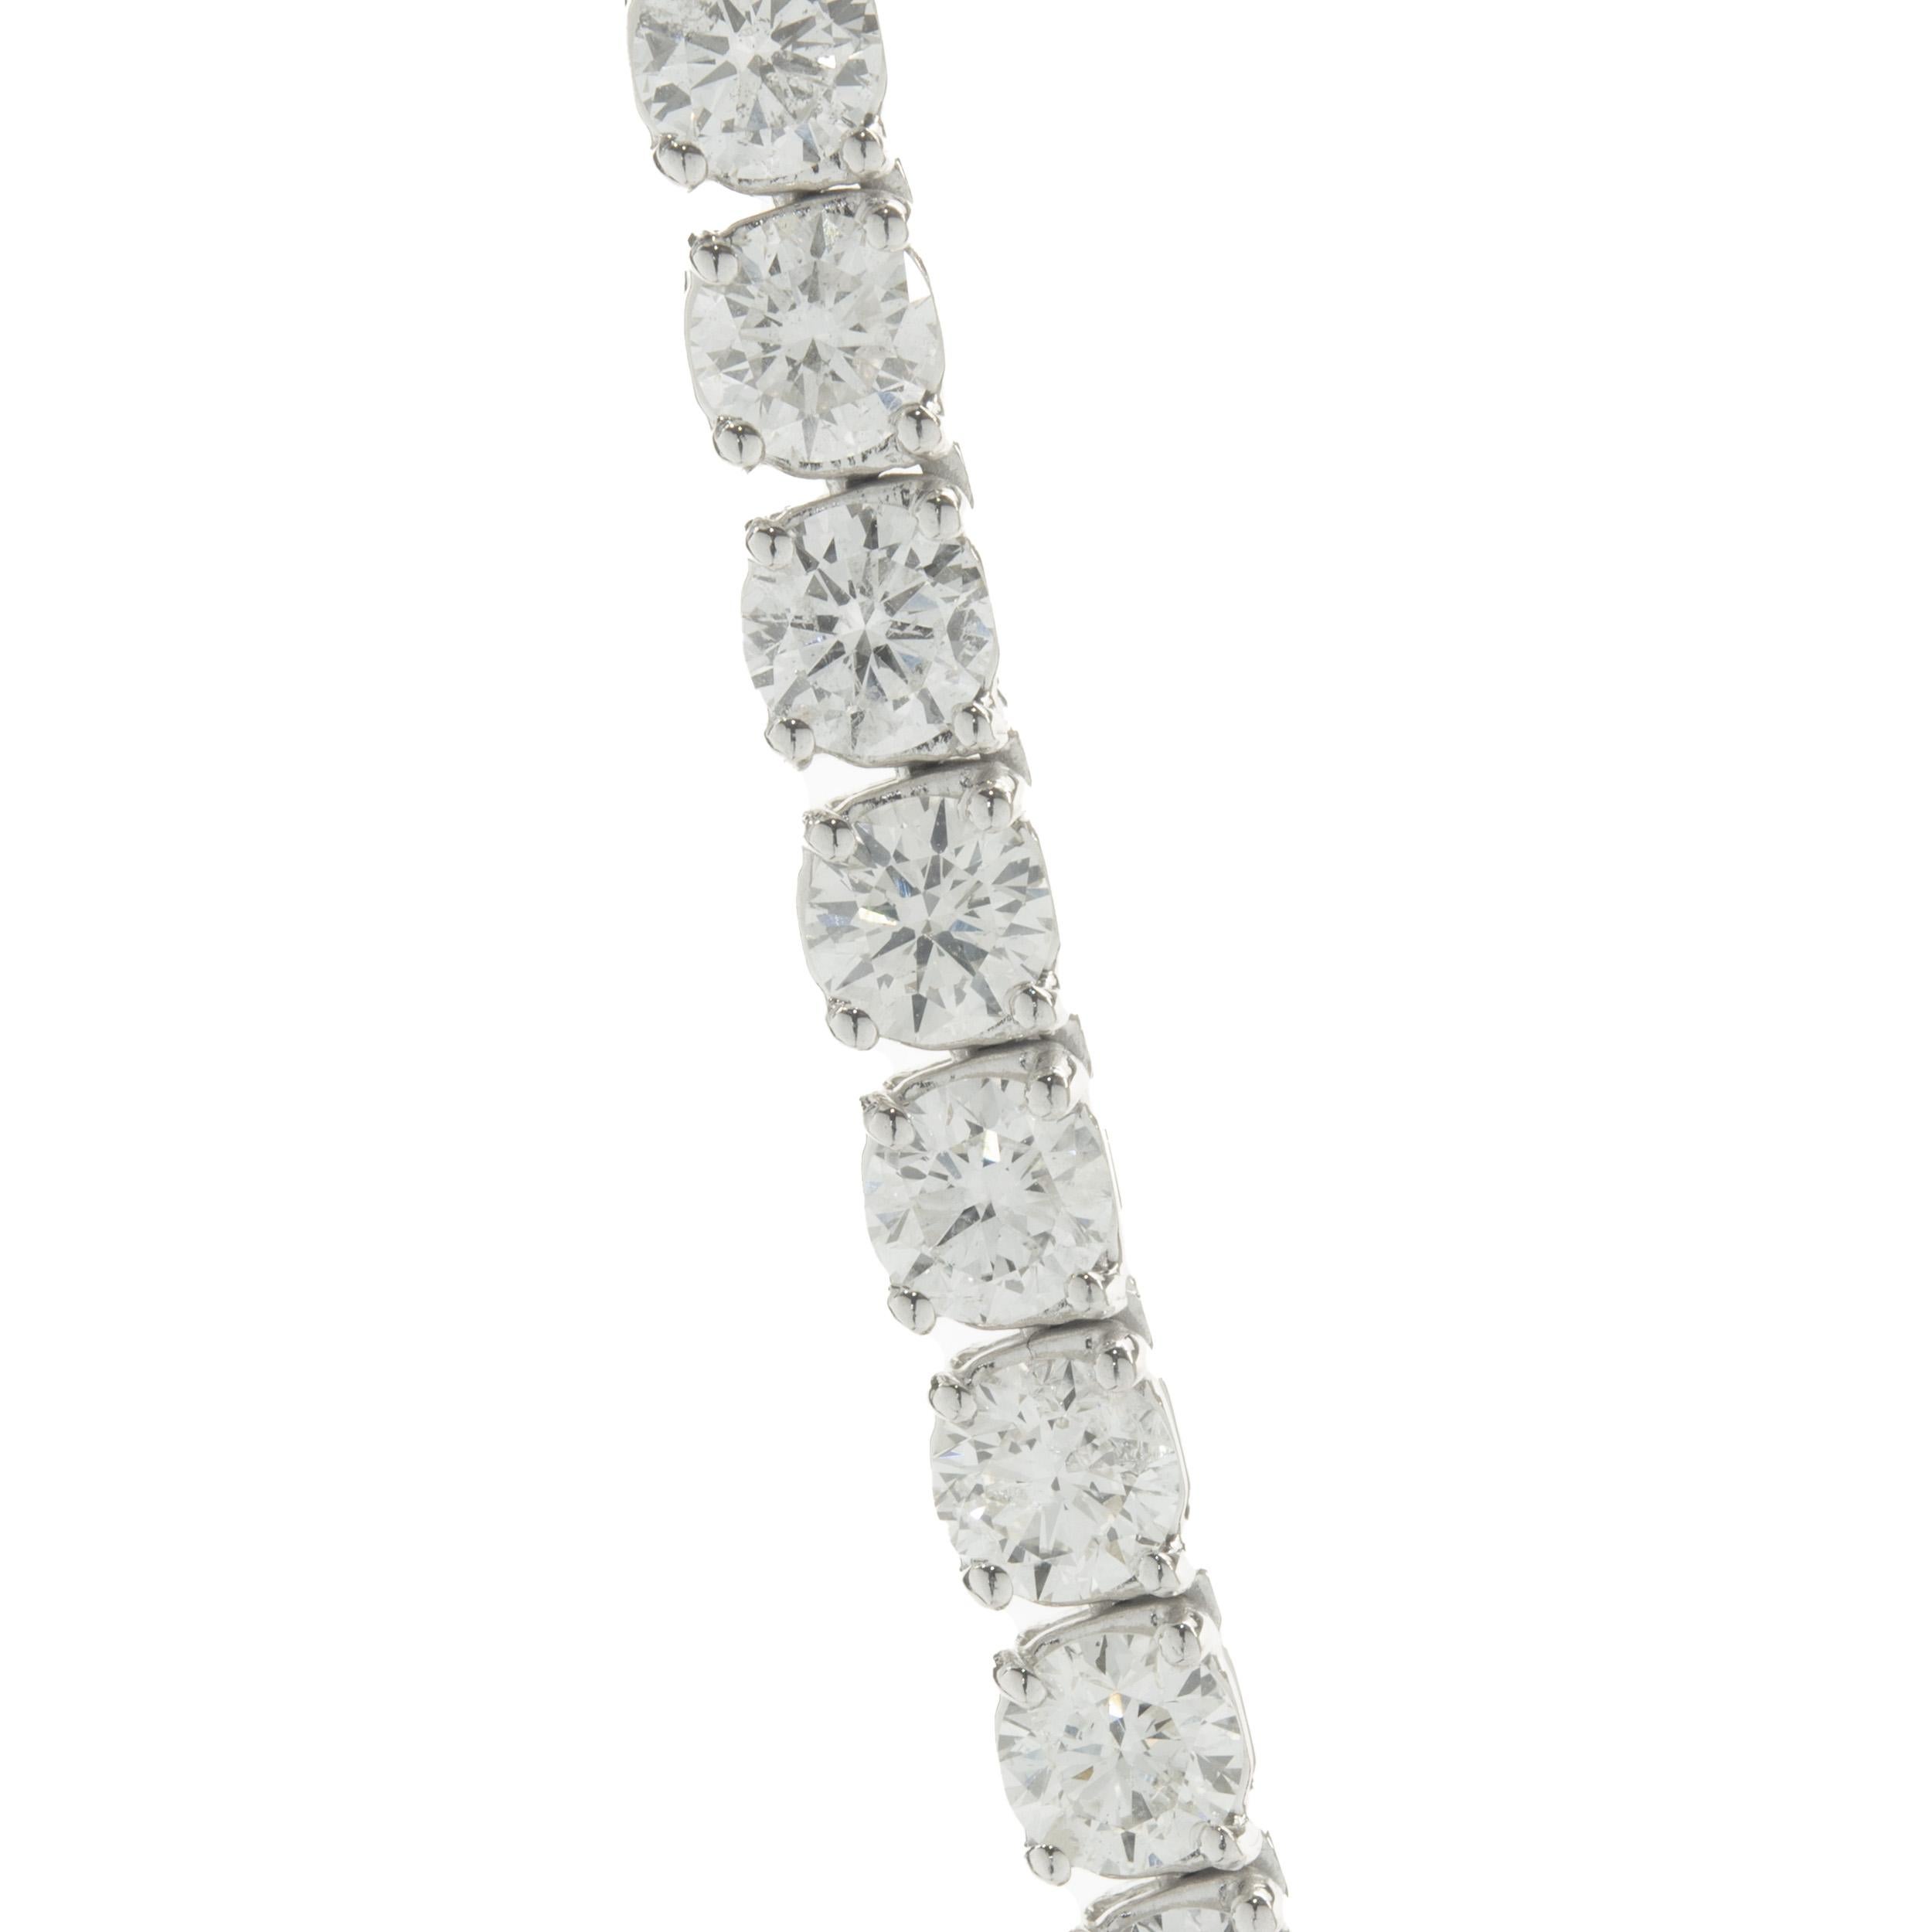 Designer: custom
Material: 14K white gold
Diamonds: round brilliant cut = 32.01cttw 
Color: G / H / I
Clarity: SI1
Weight: 41.95 grams
Dimensions: necklace measures 20-inches long